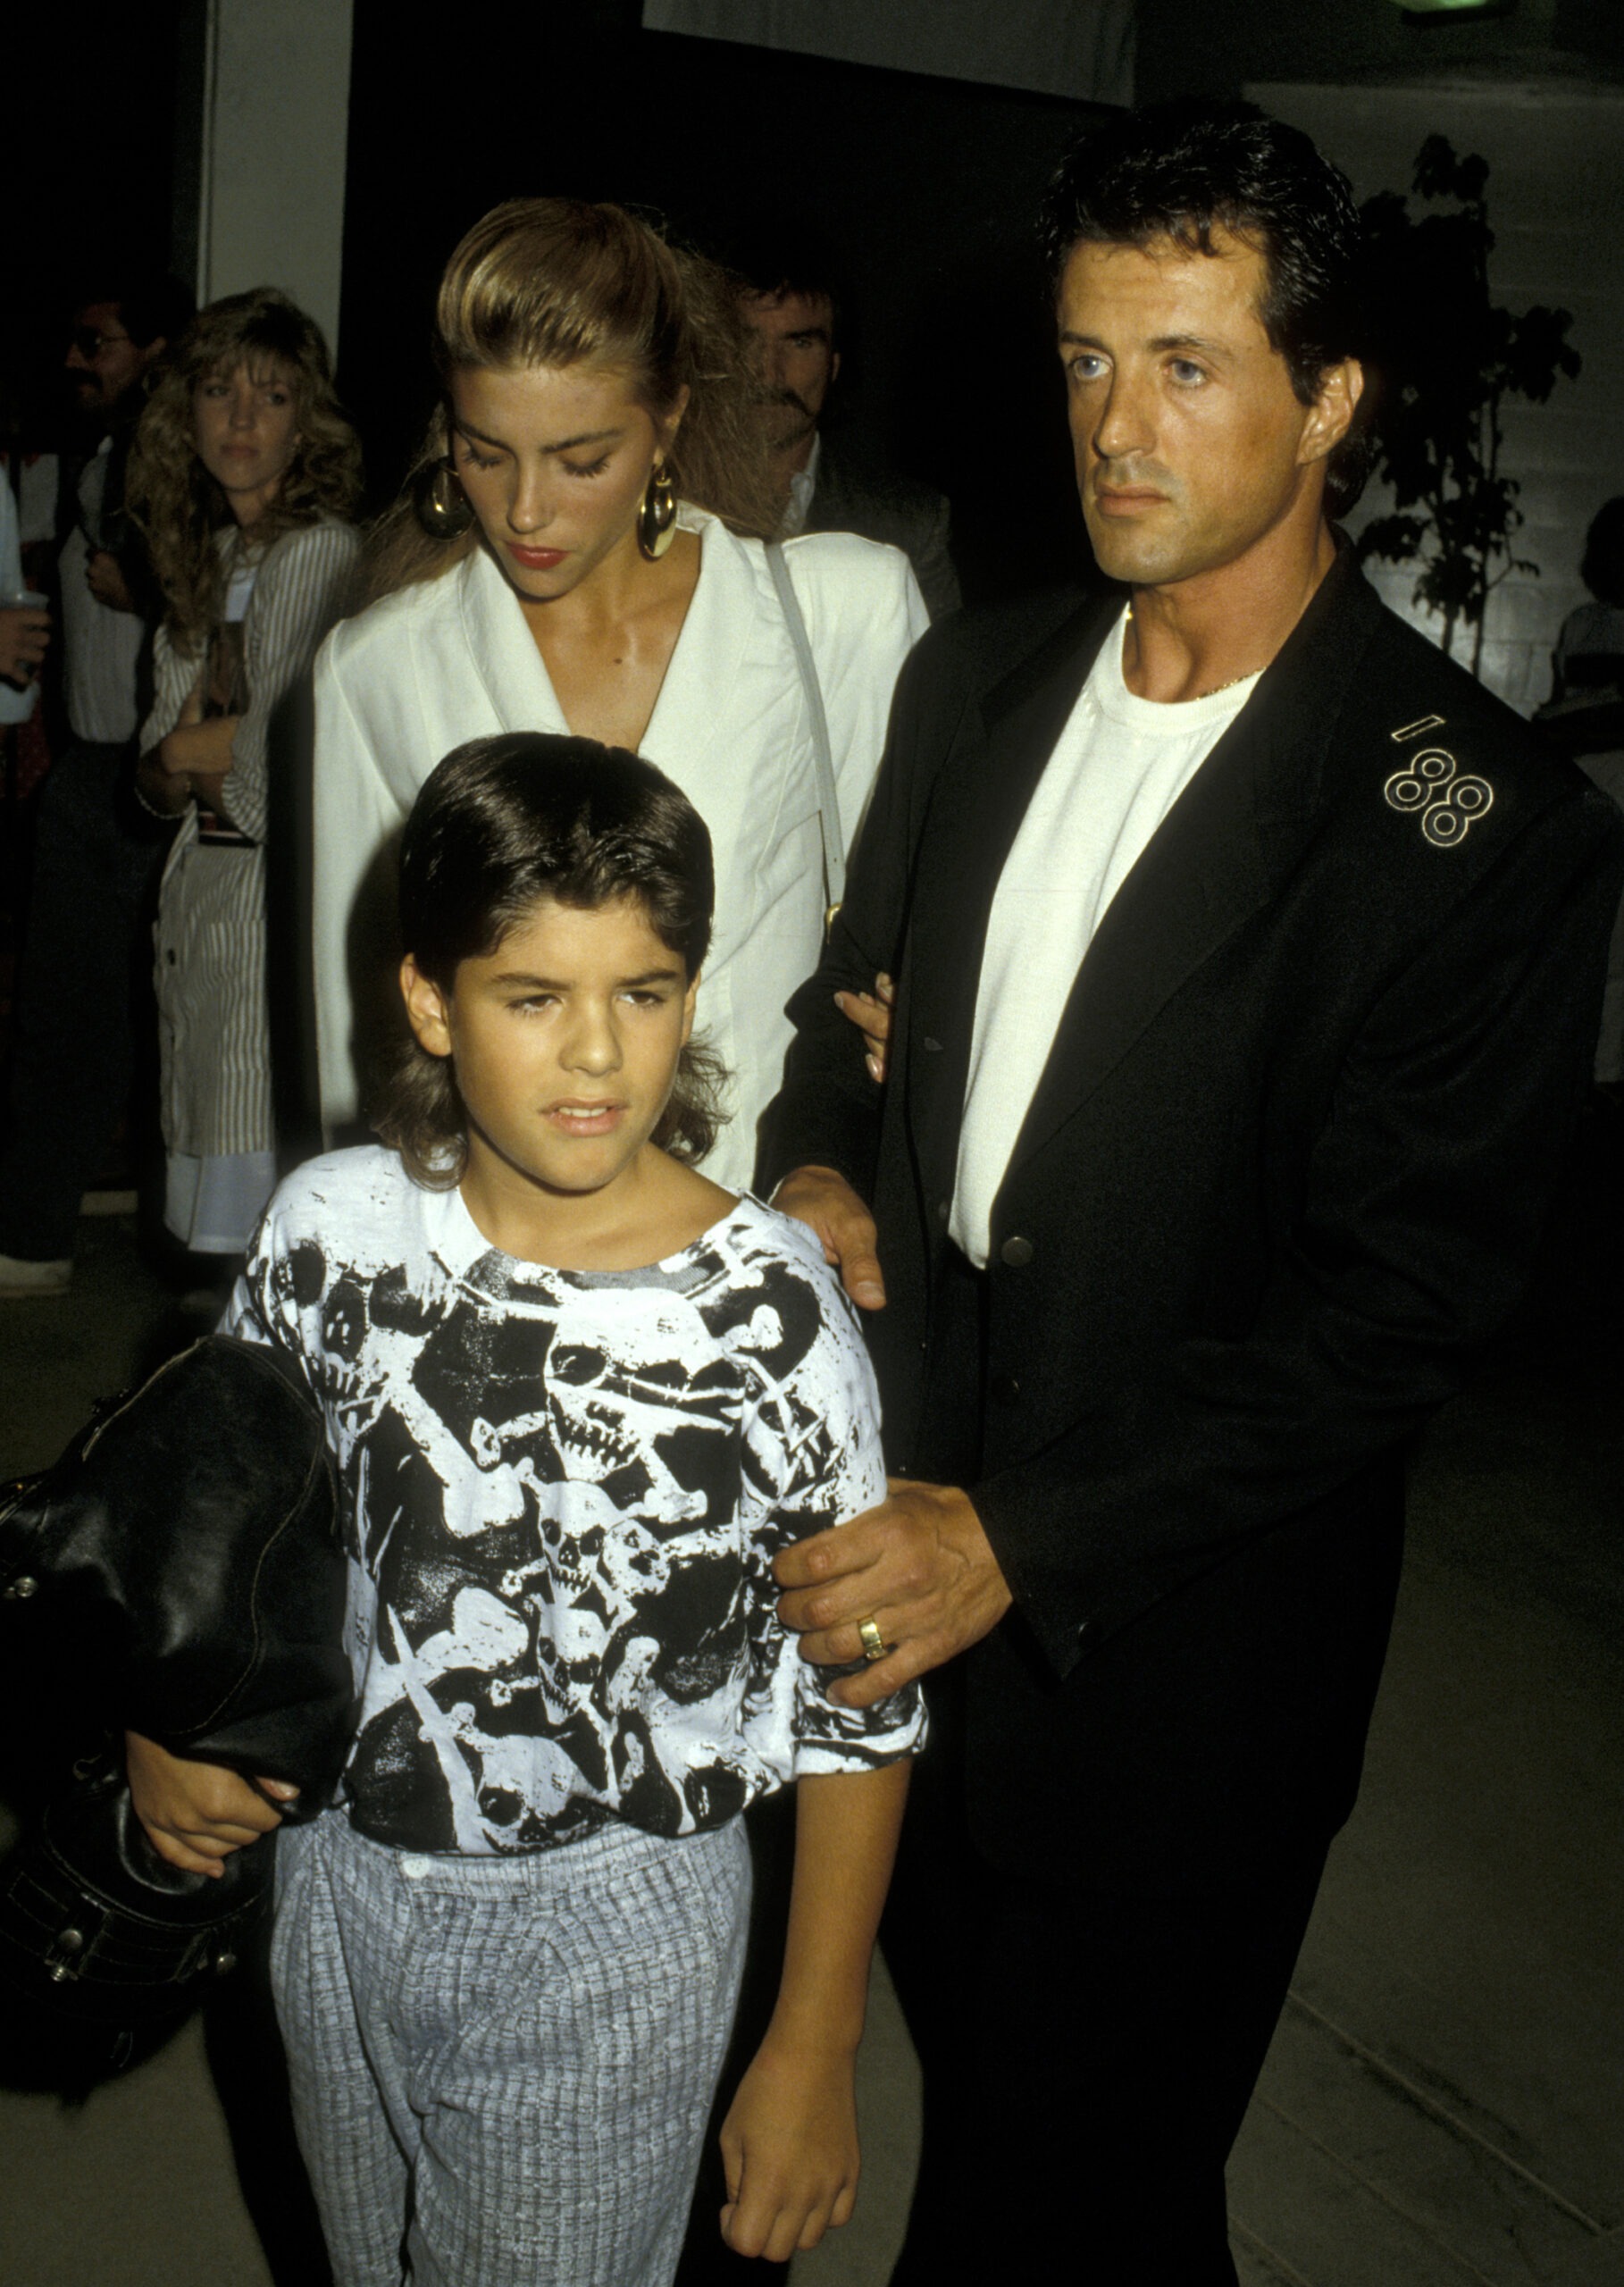 Jennifer Flavin Sylvester Stallone and his son Sage Stallone at a polo match in 1988 | Source: Getty Images